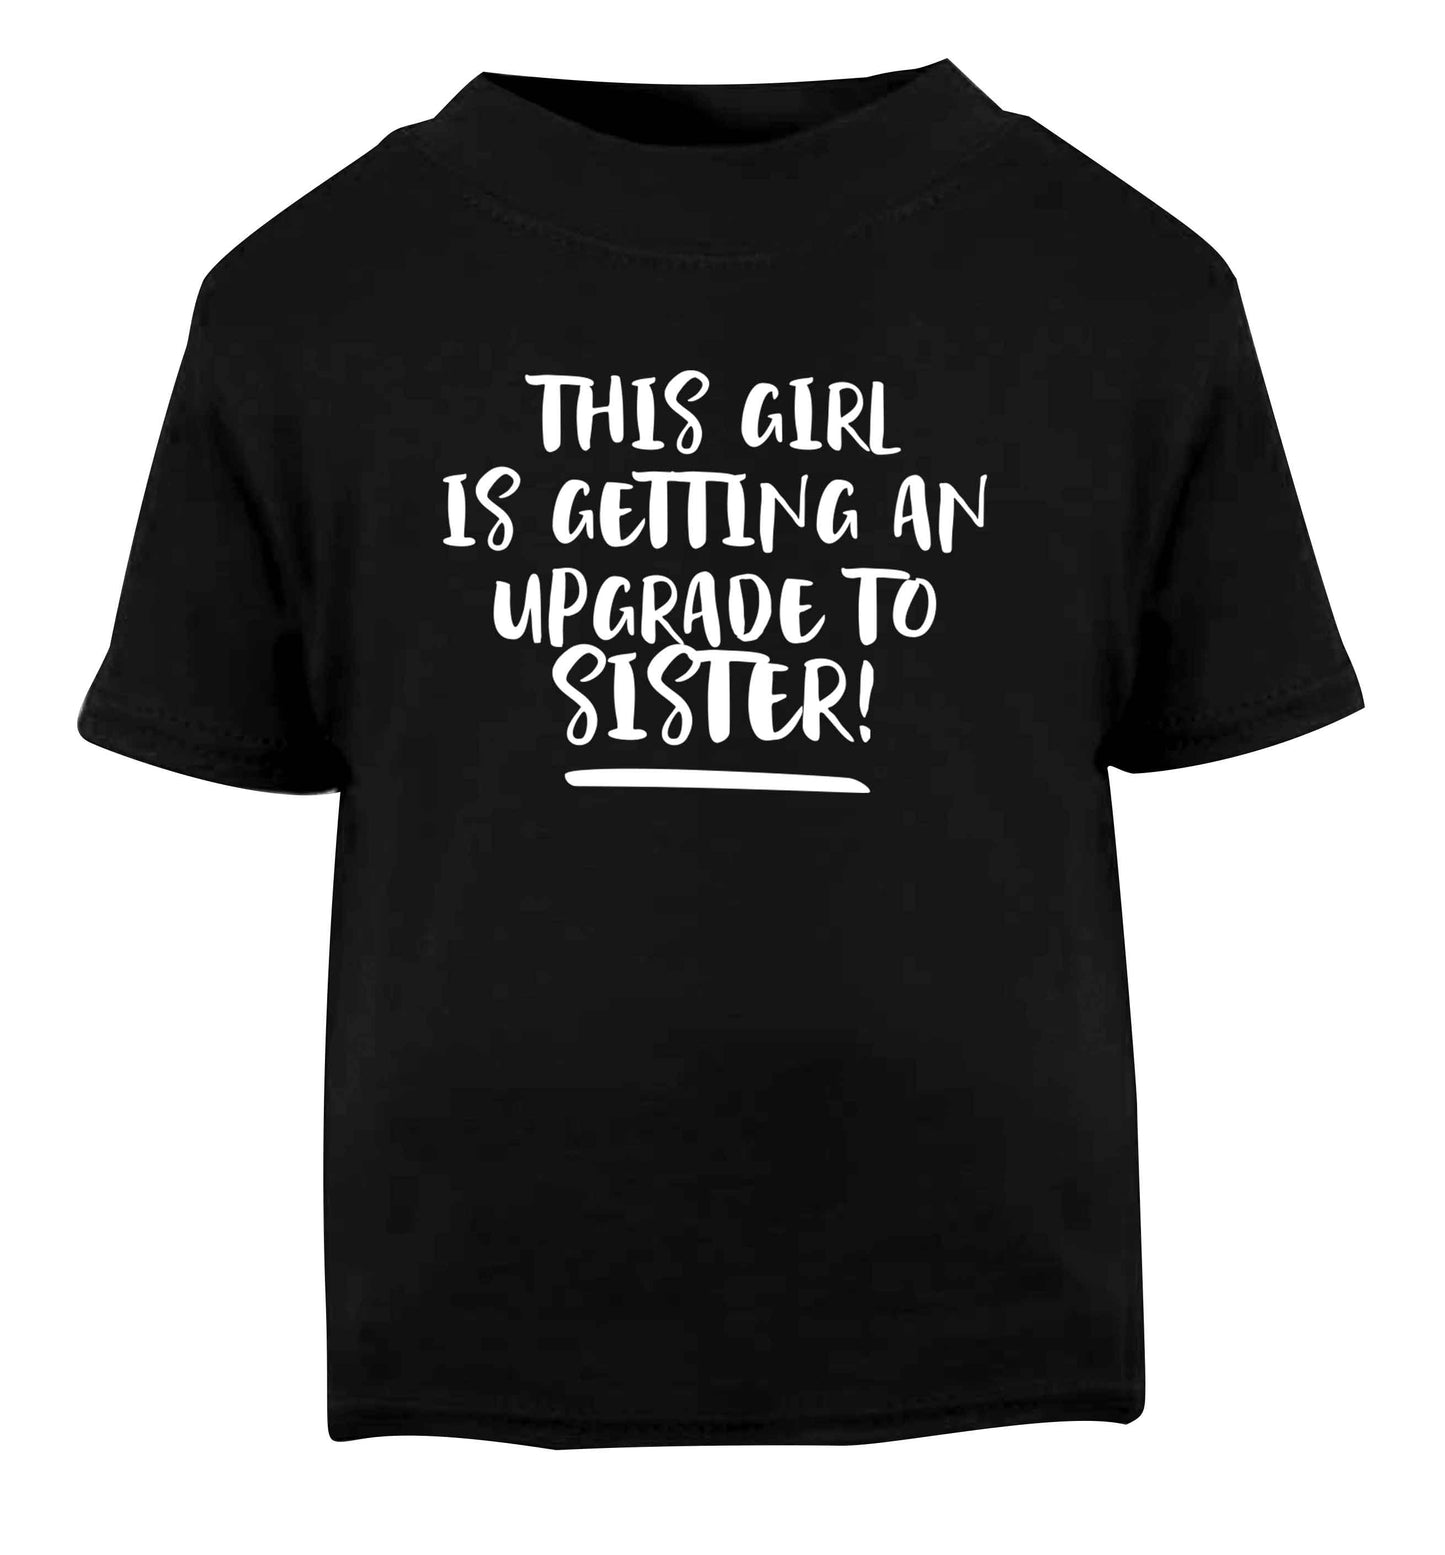 This girl is getting an upgrade to sister! Black Baby Toddler Tshirt 2 years